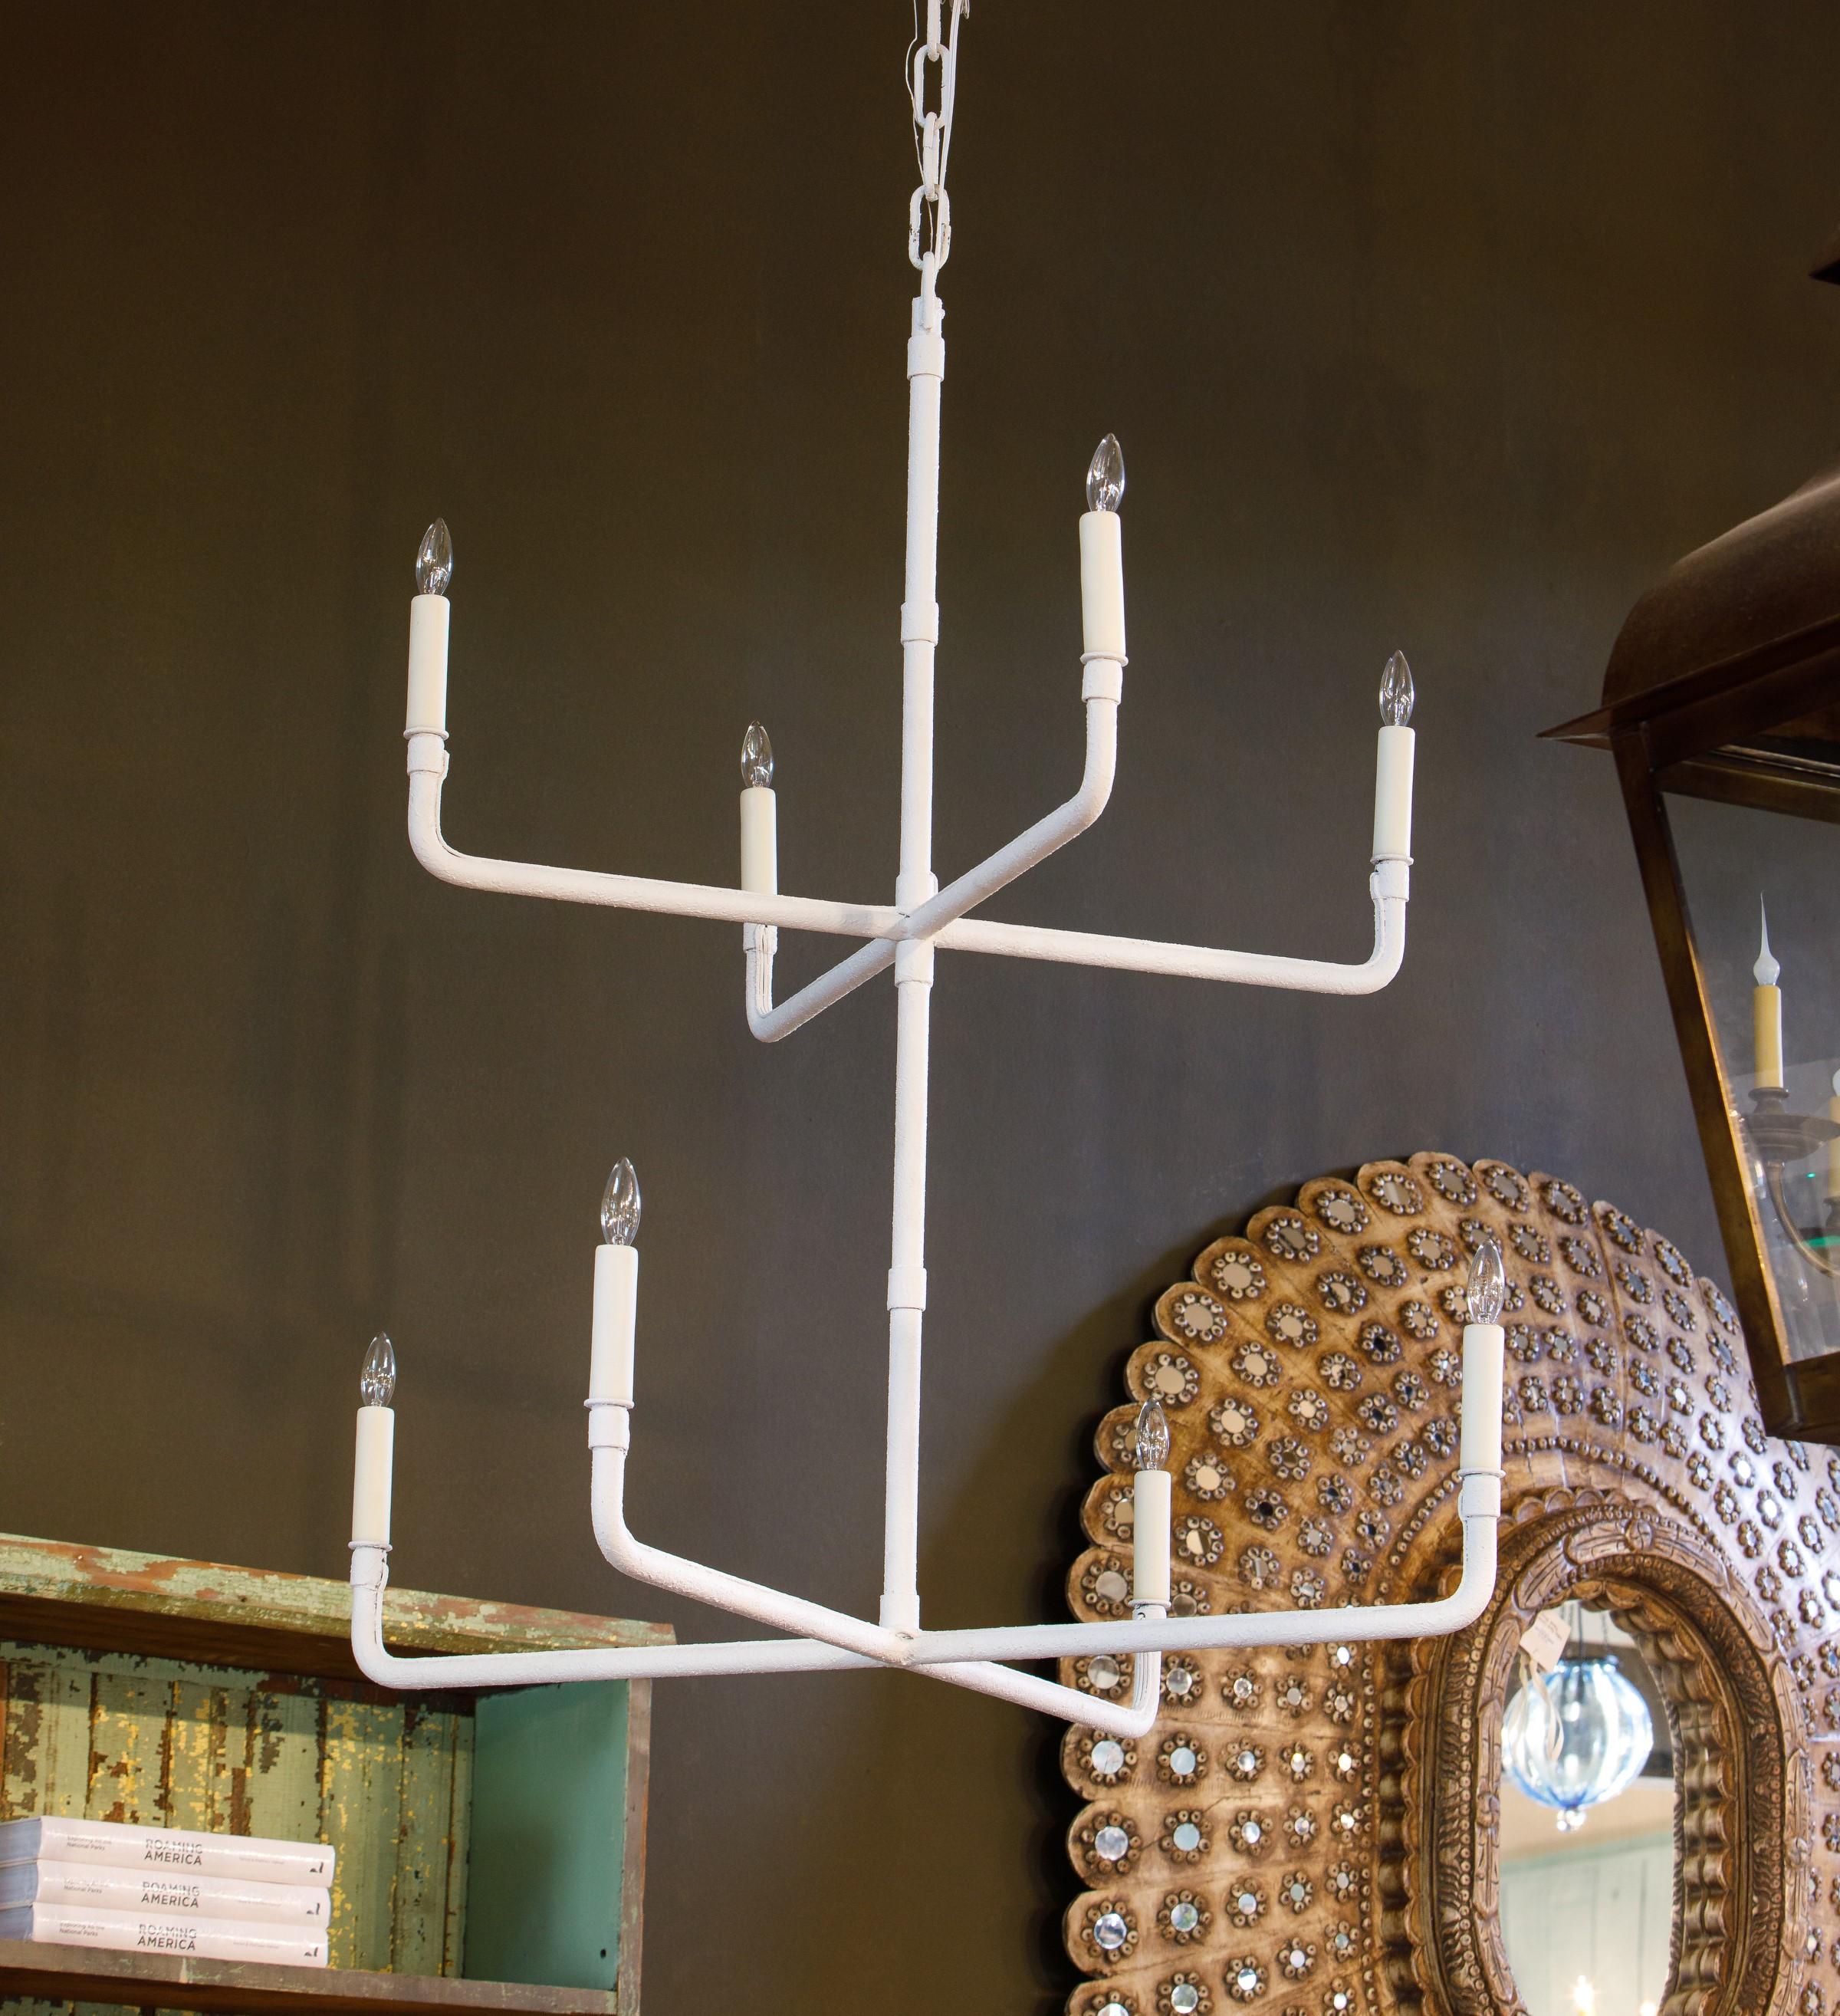 Two-tier hand-made iron chandelier of simple, minimalistic design. Eight alternating arms with candelabra-size sockets (each accommodates up to 60 watts). This particular version is painted white for sleek, more modern look; however, the light is